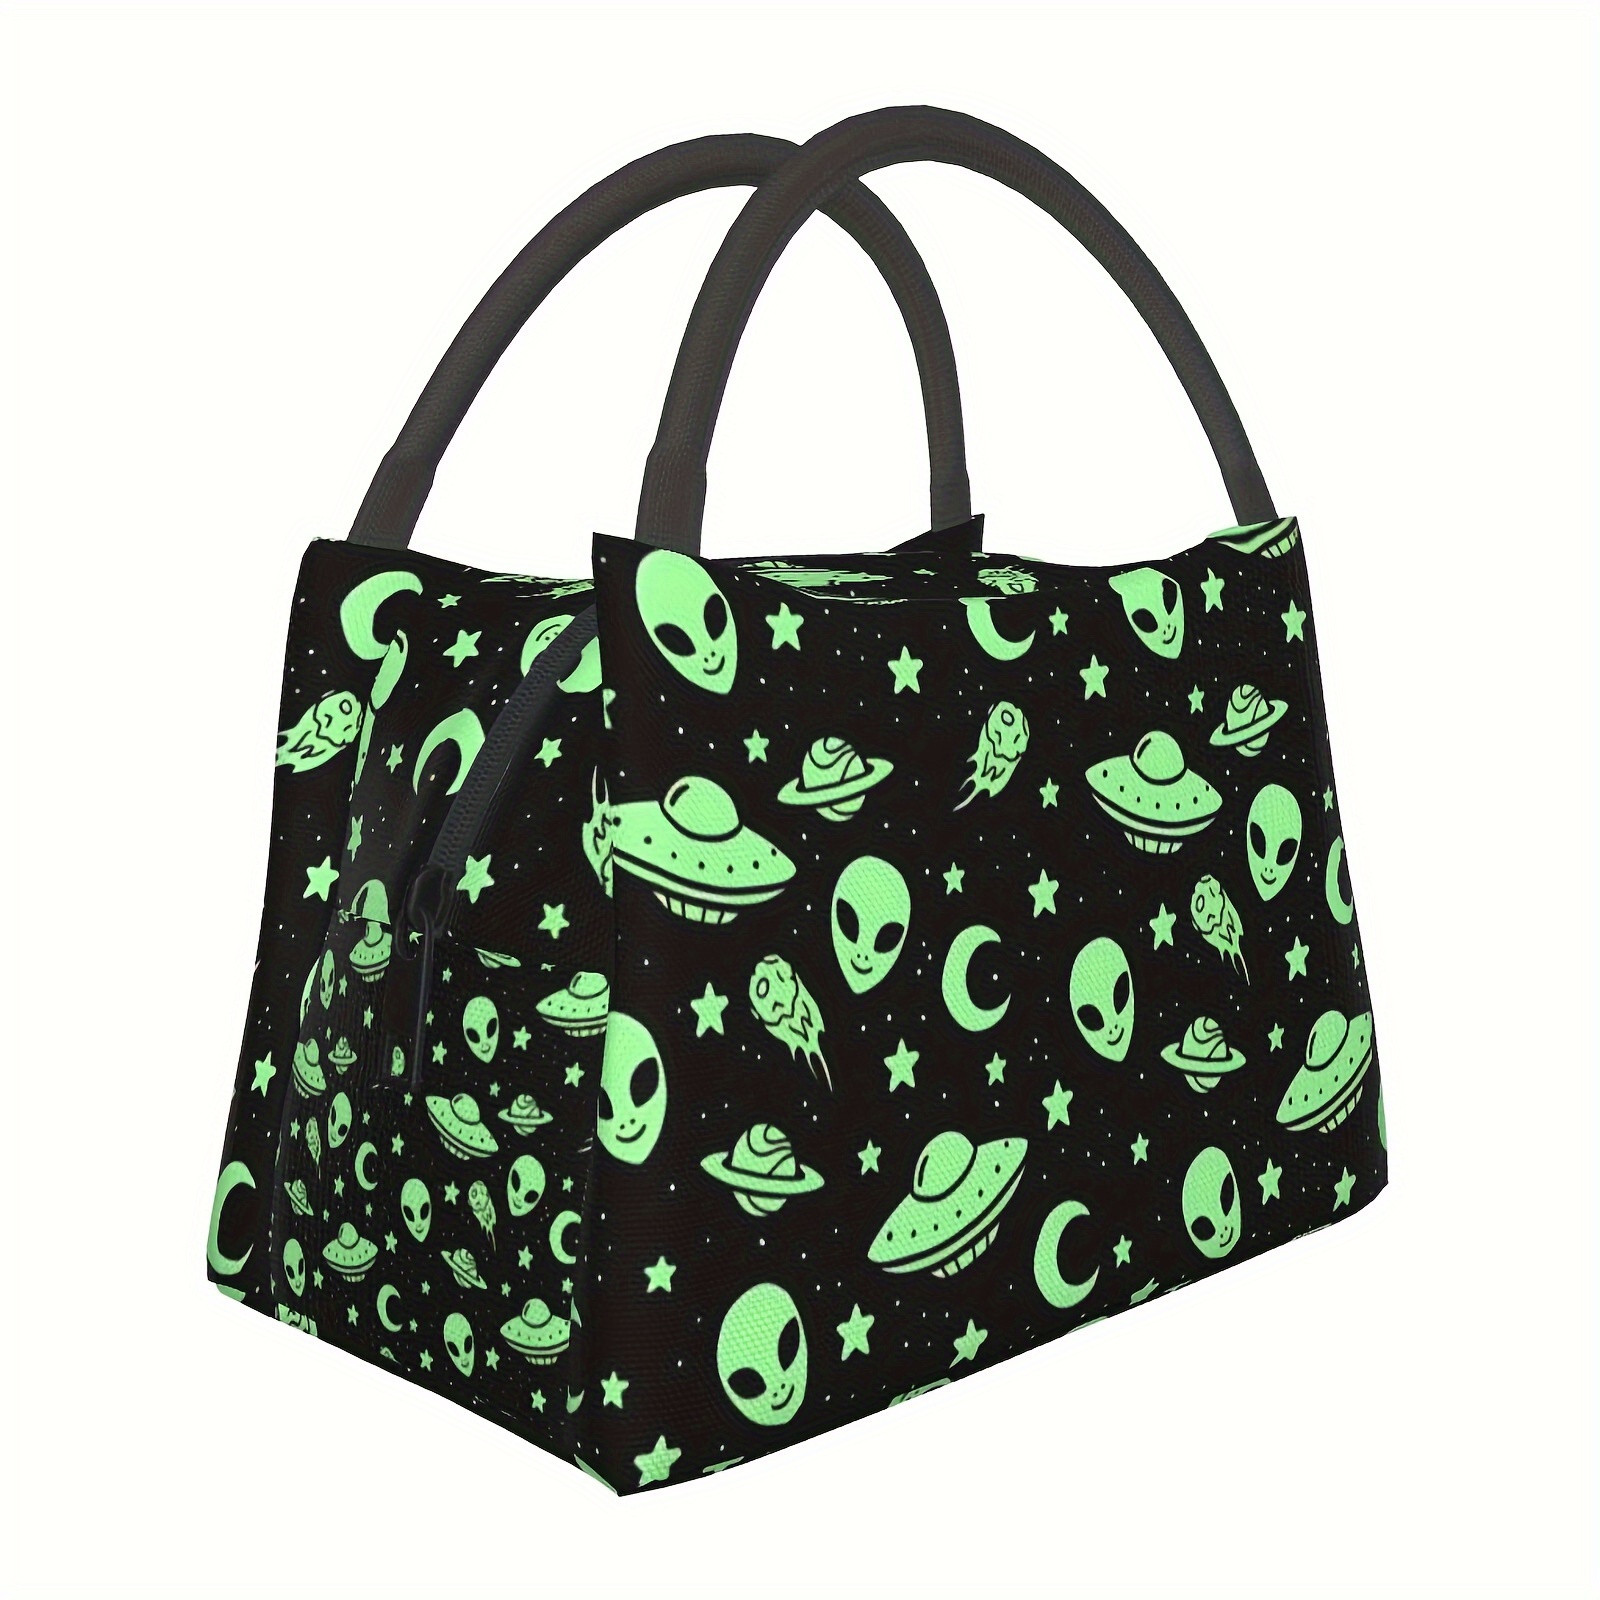 

Universal Portable Insulated Lunch Bag With Alien And Spaceship Pattern, Leakproof Polyester Cooler Tote For Camping, Picnic, Beach, Home, Office, And Outdoor Activities, 11x6.3x6.7 Inch - Pack Of 1